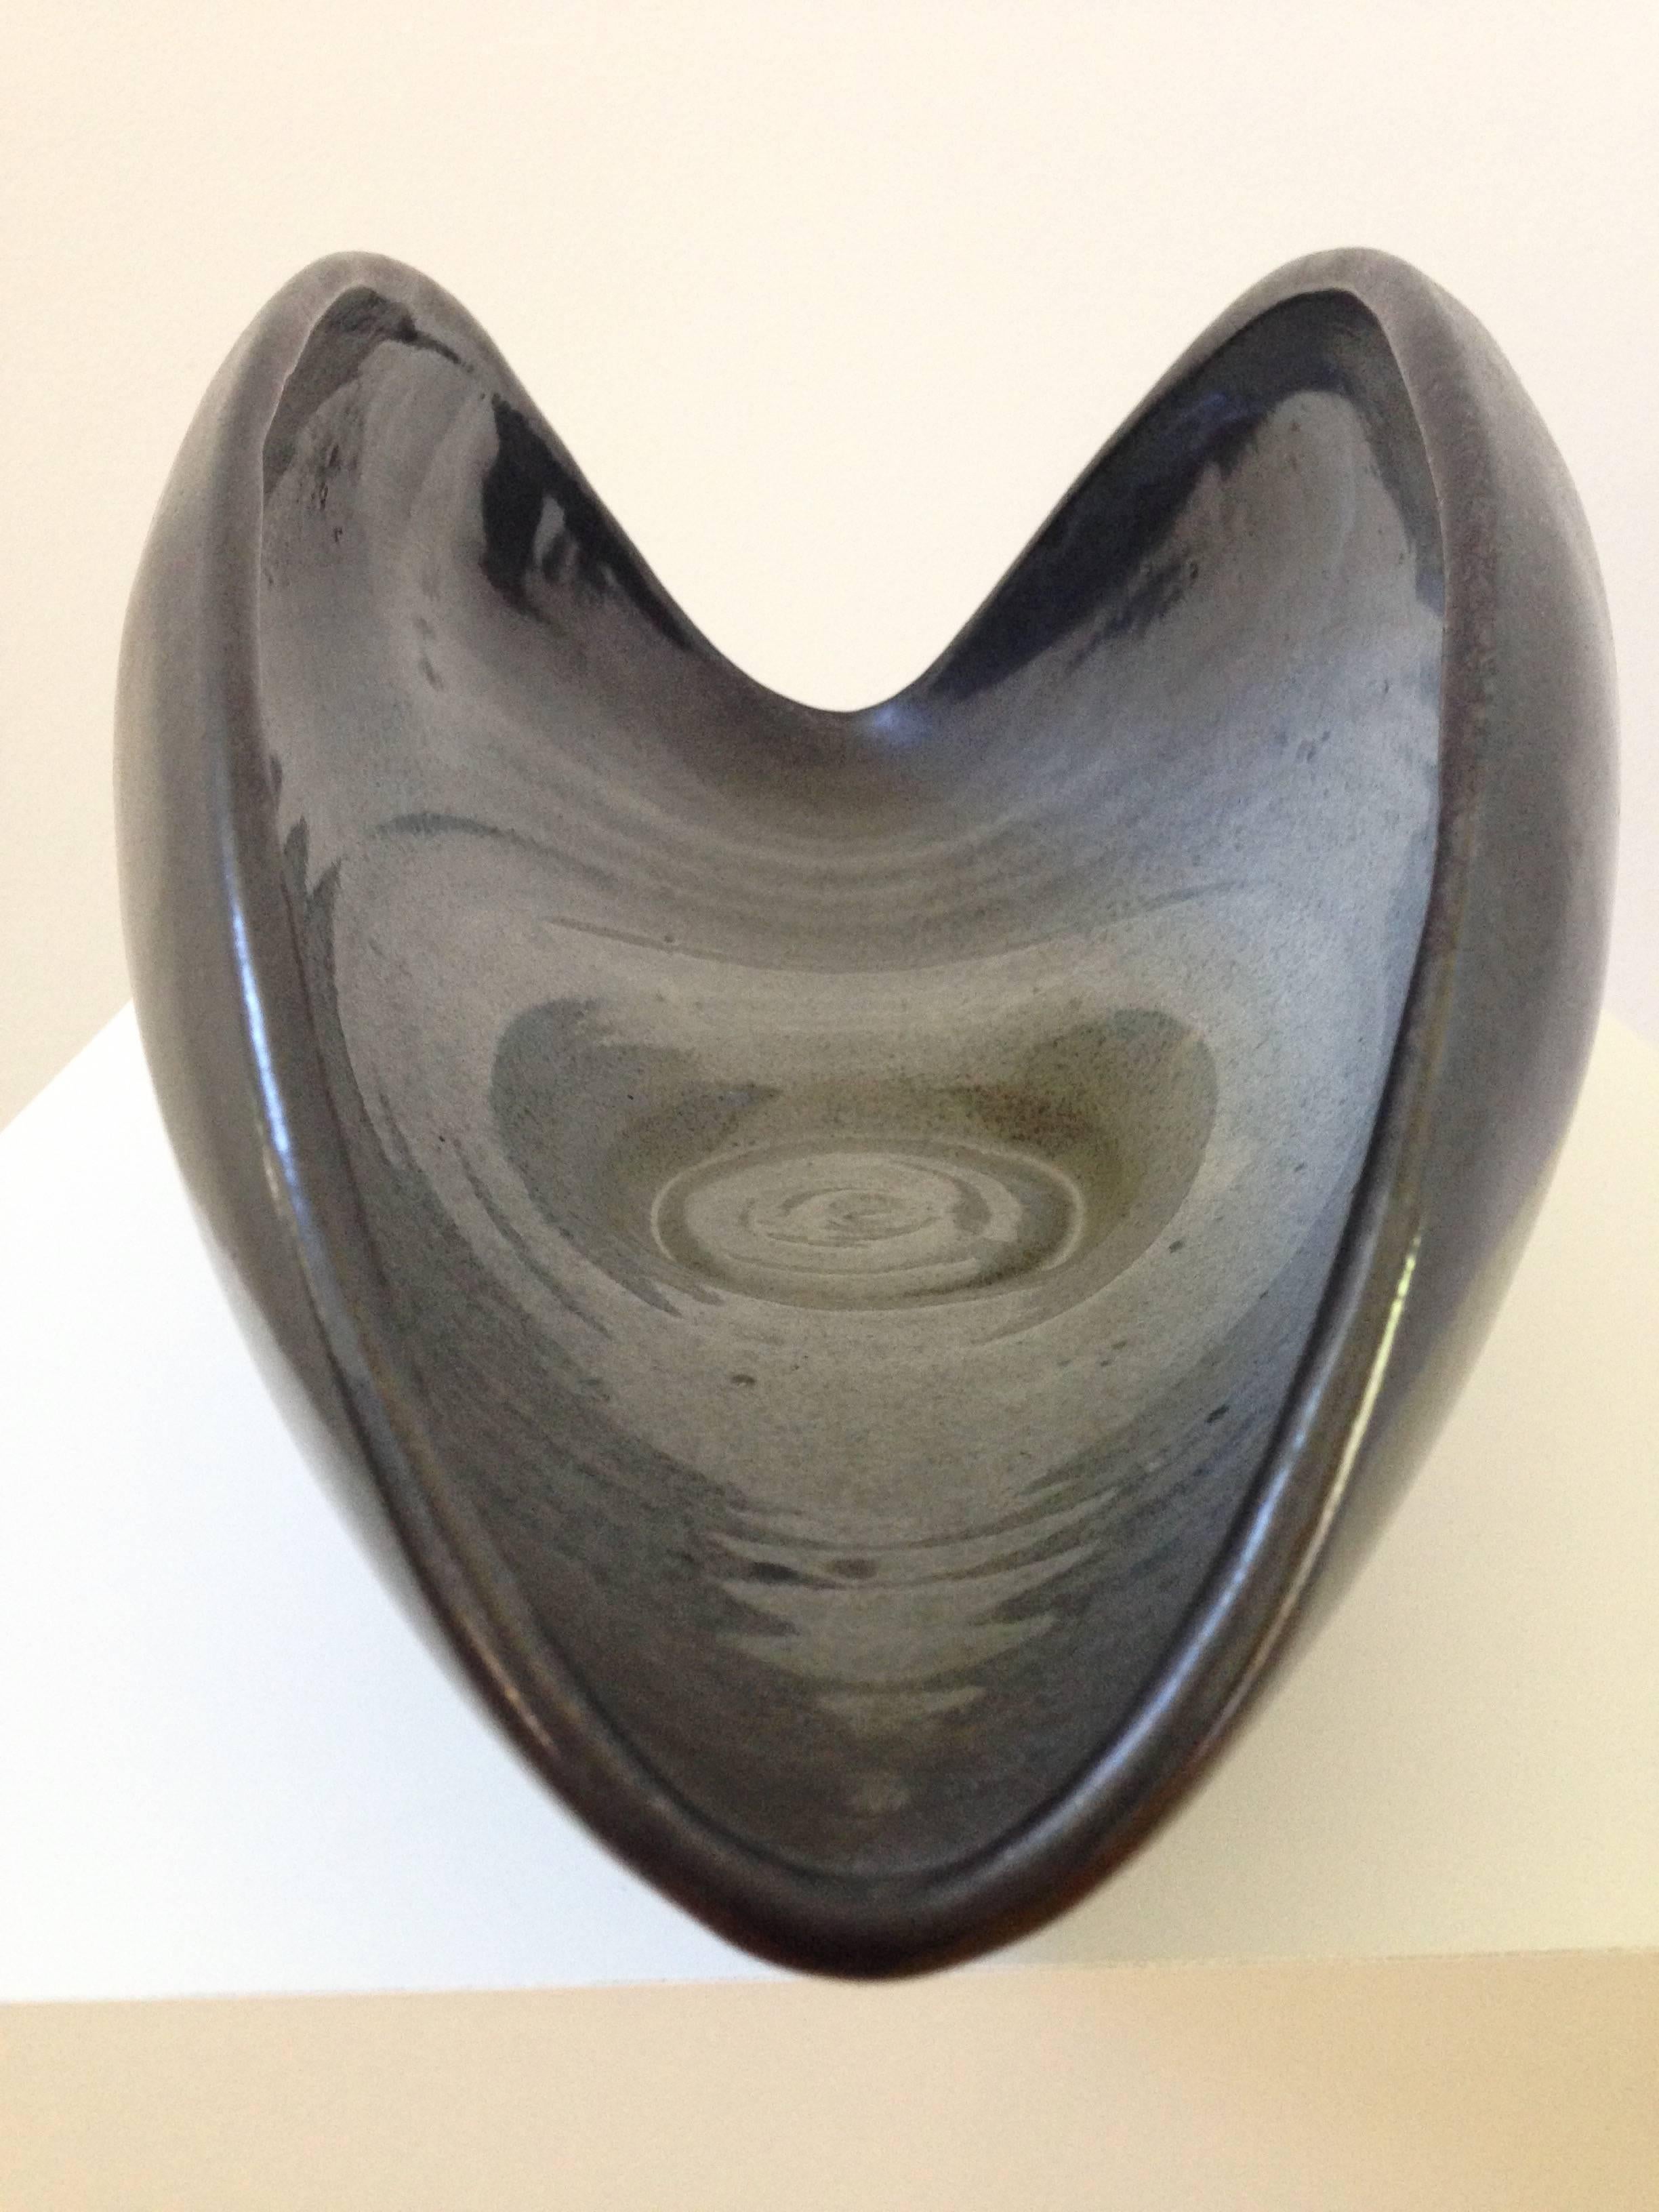 Large Glazed French Ceramic Sculptural Bowl In Excellent Condition For Sale In Ashburn, VA